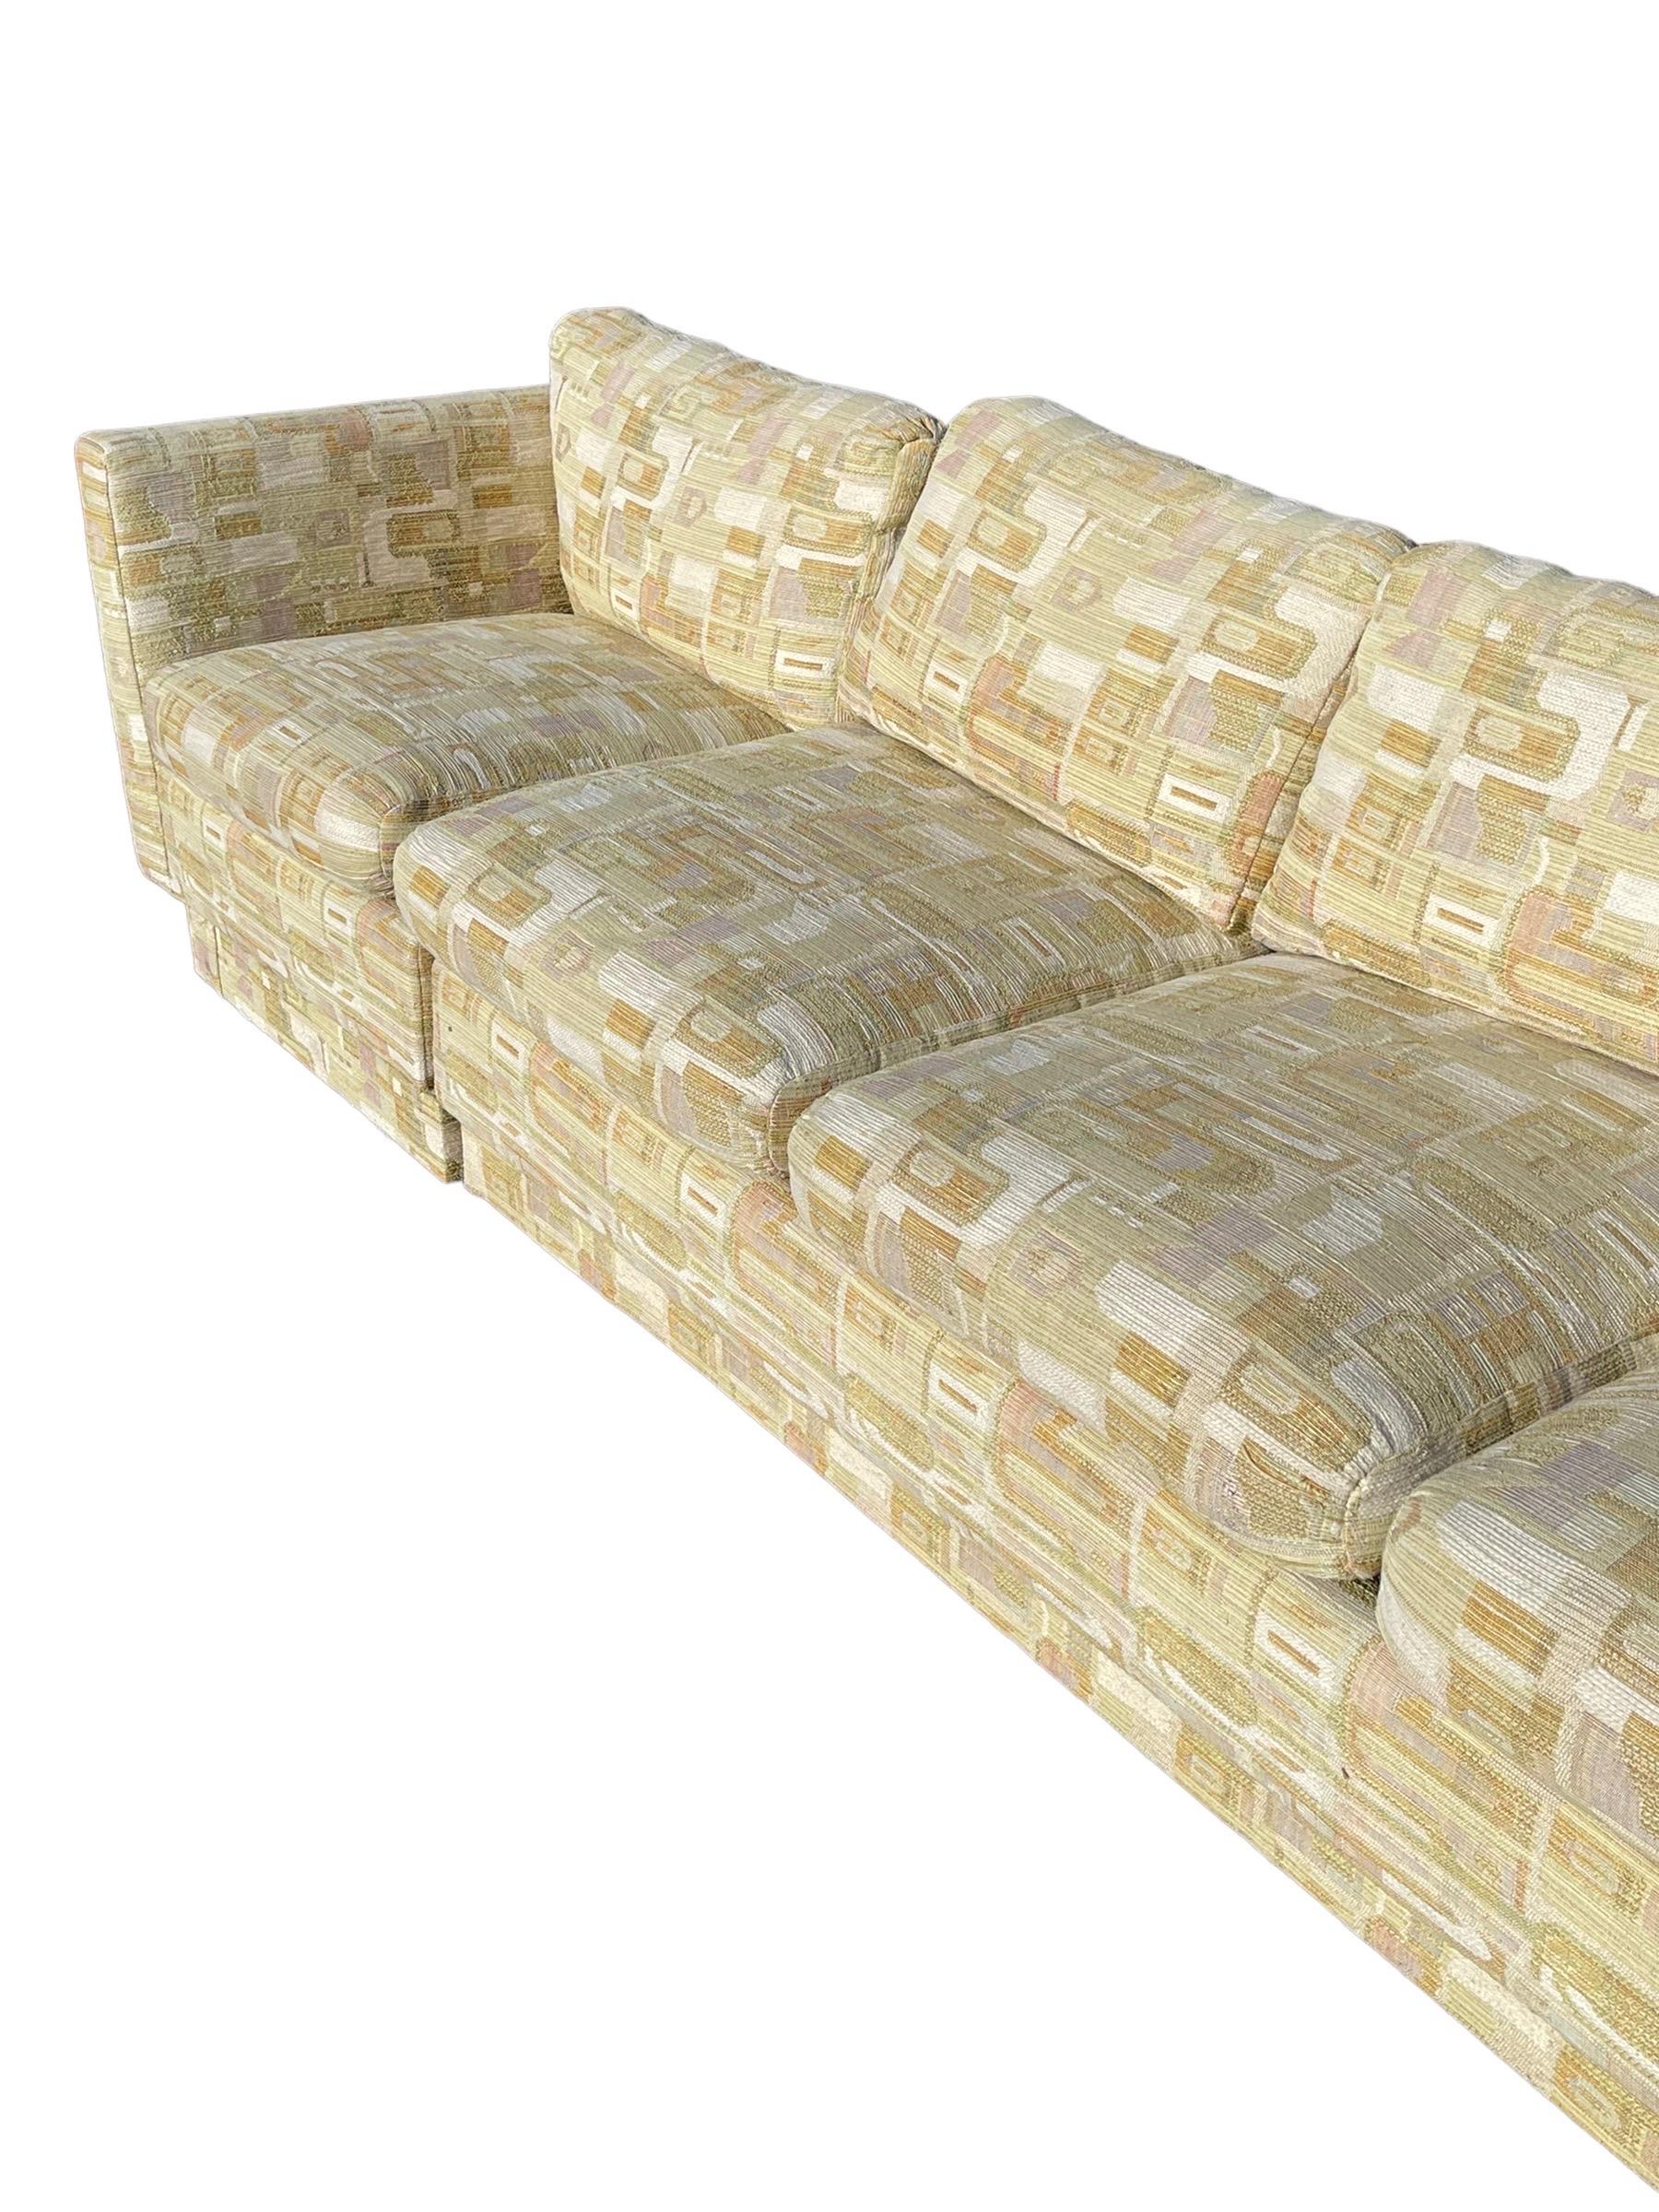 Fabric Milo Baughman for Thayer Coggin Sectional Couch